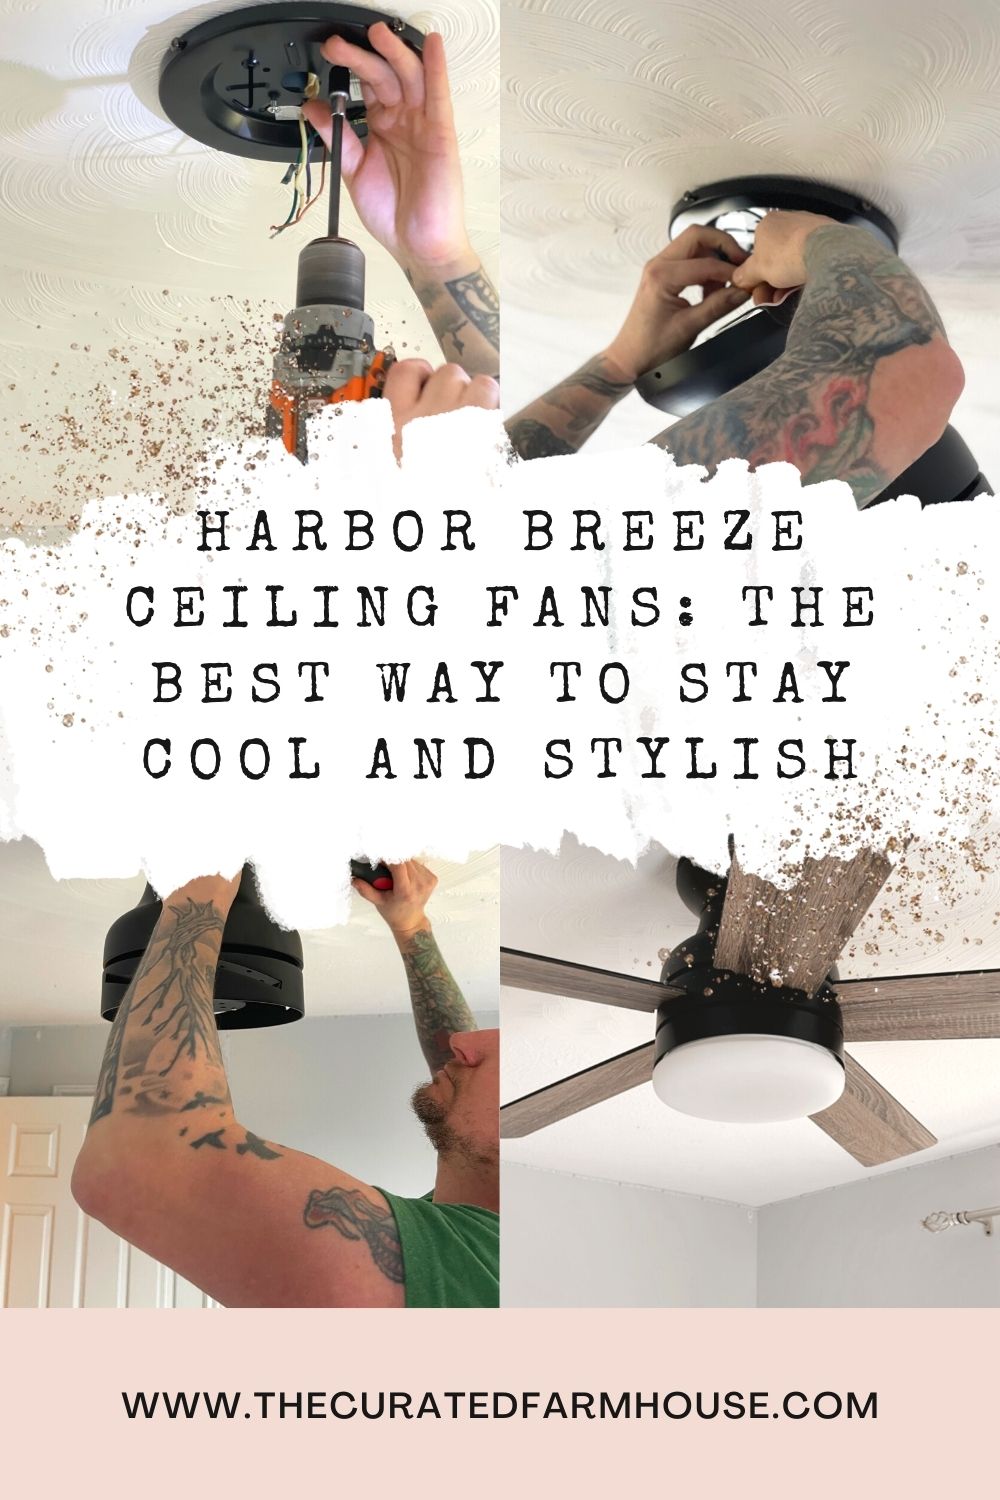 Harbor Breeze Home Ceiling Fans: The Best Way to Stay Cool and Stylish